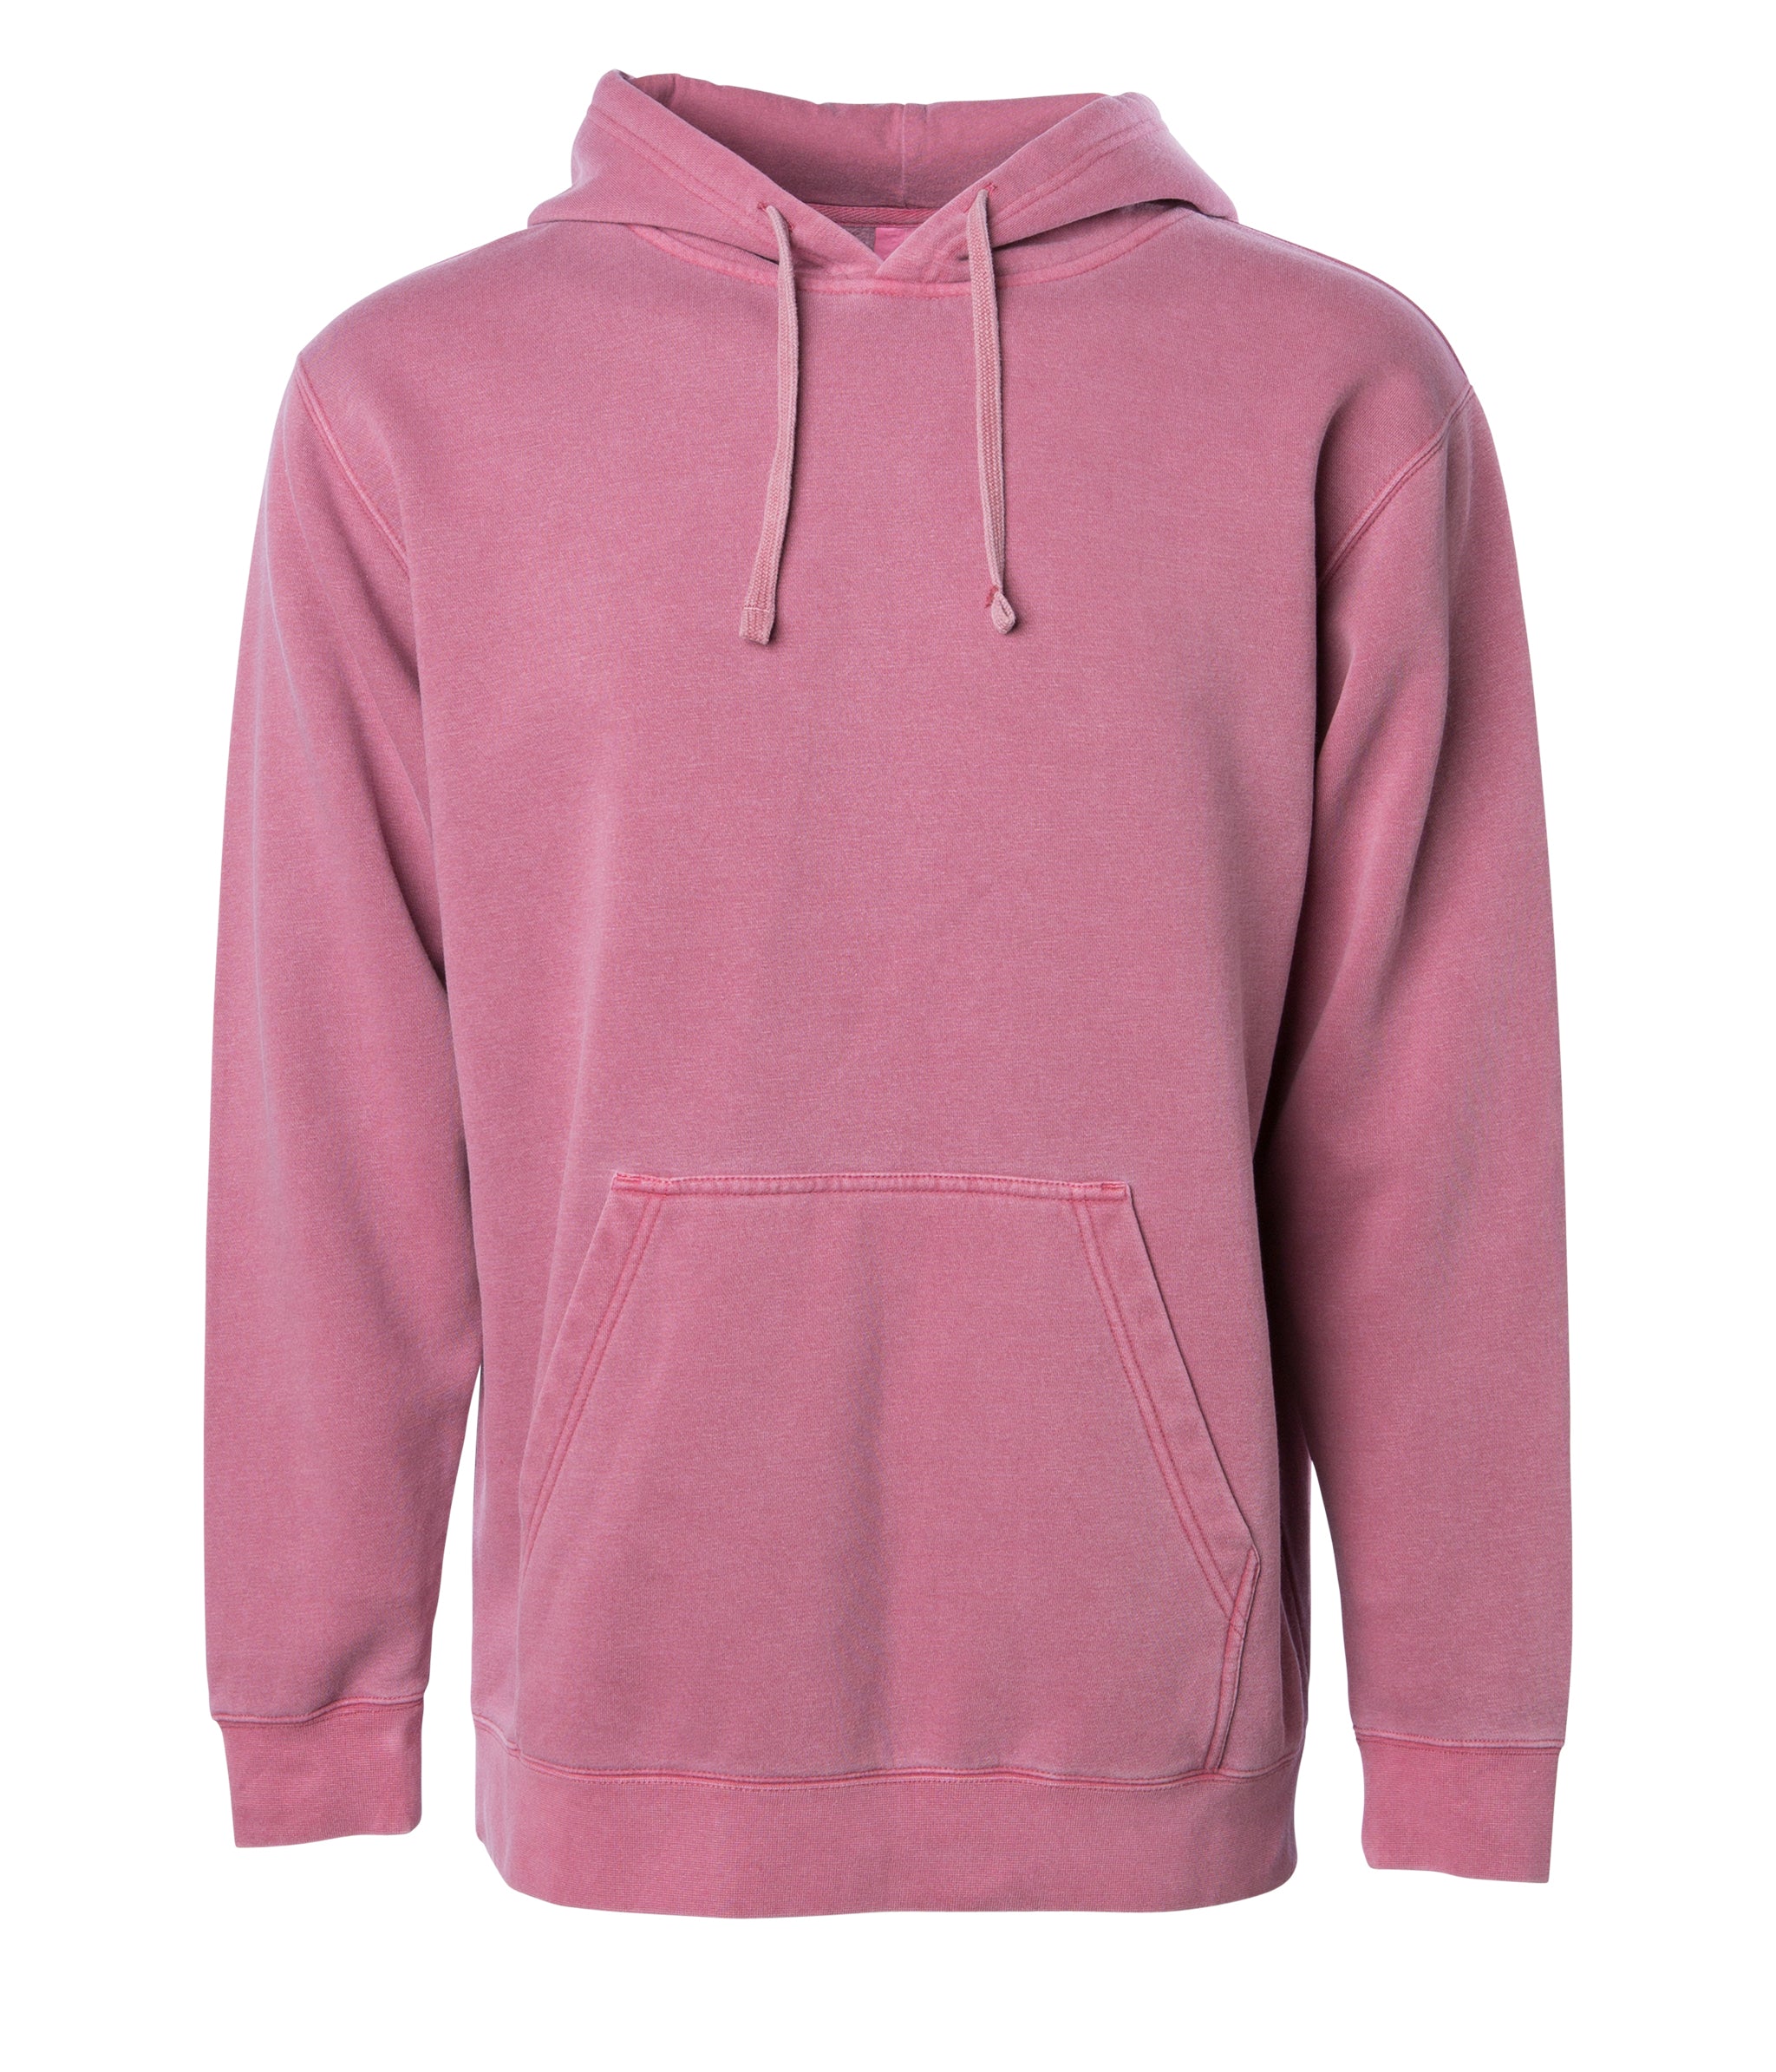 Unisex Midweight Pigment Dyed Hooded Pullover  Unique Vintage Character -  Independent Trading Company